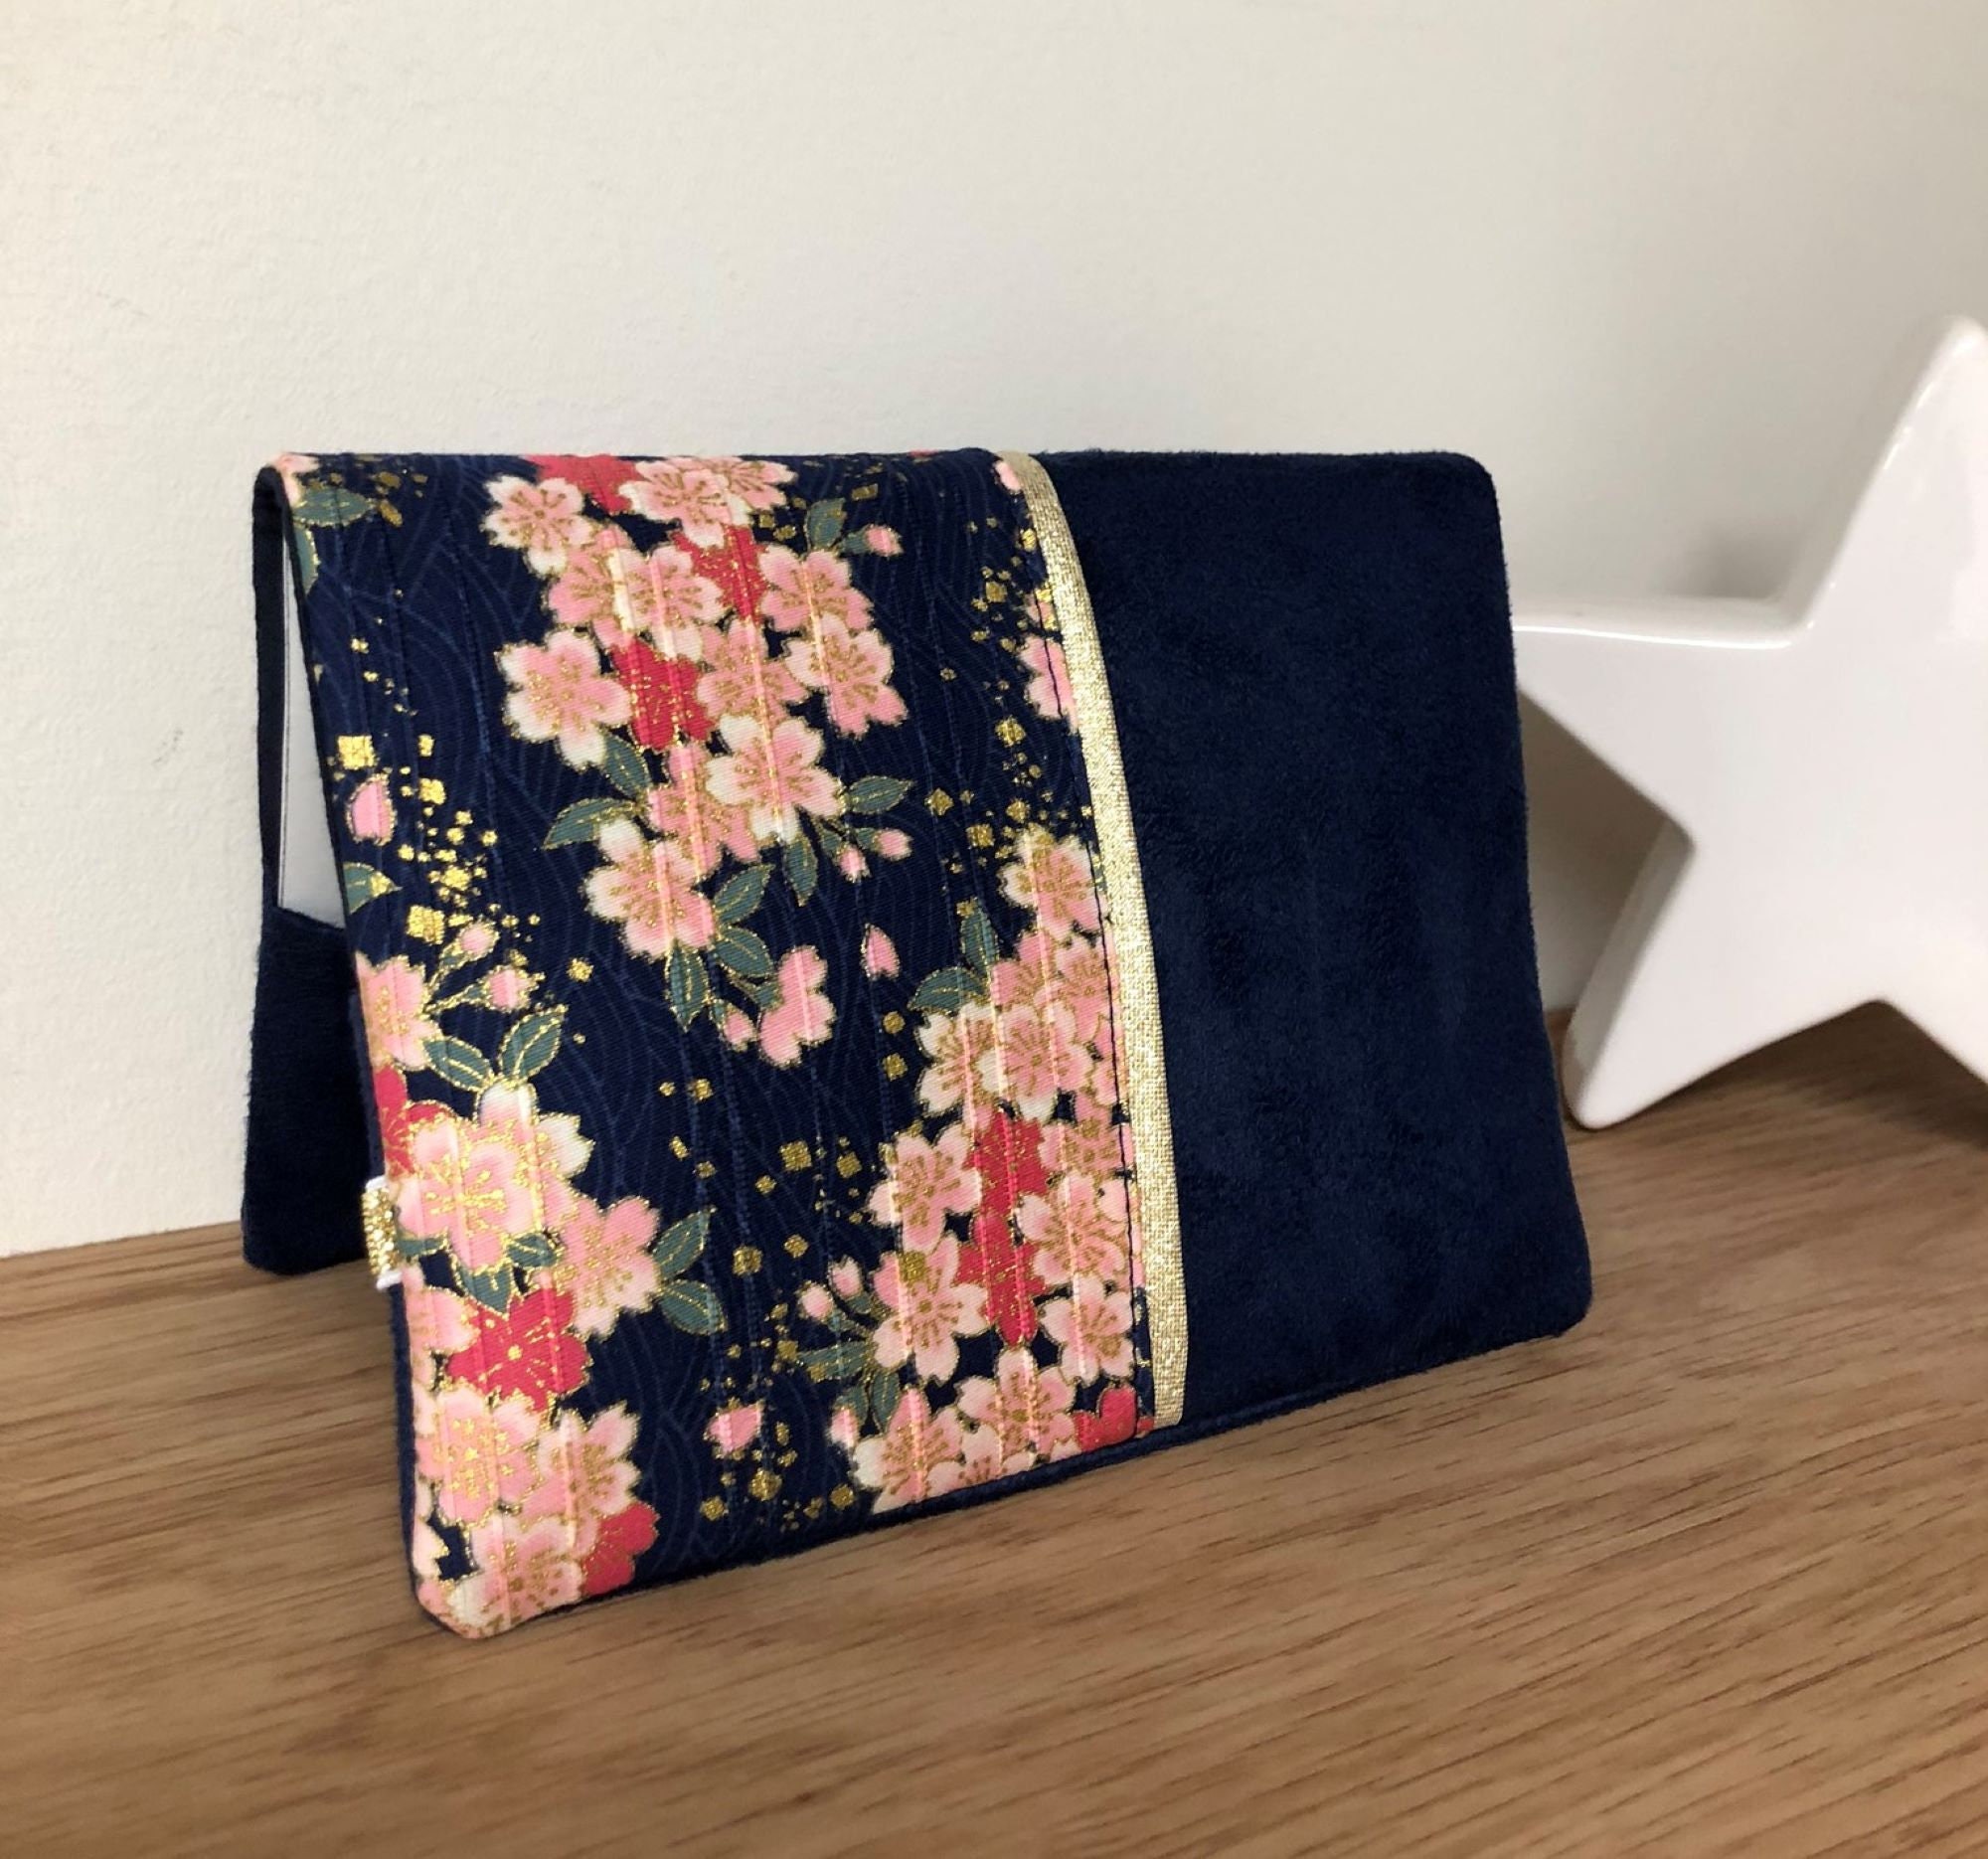 Mini Pencil Case in Japanese Fabric and Linen, Golden Star / Small  Customizable Pen Triangle Case, Beige, Navy Blue and Gold 